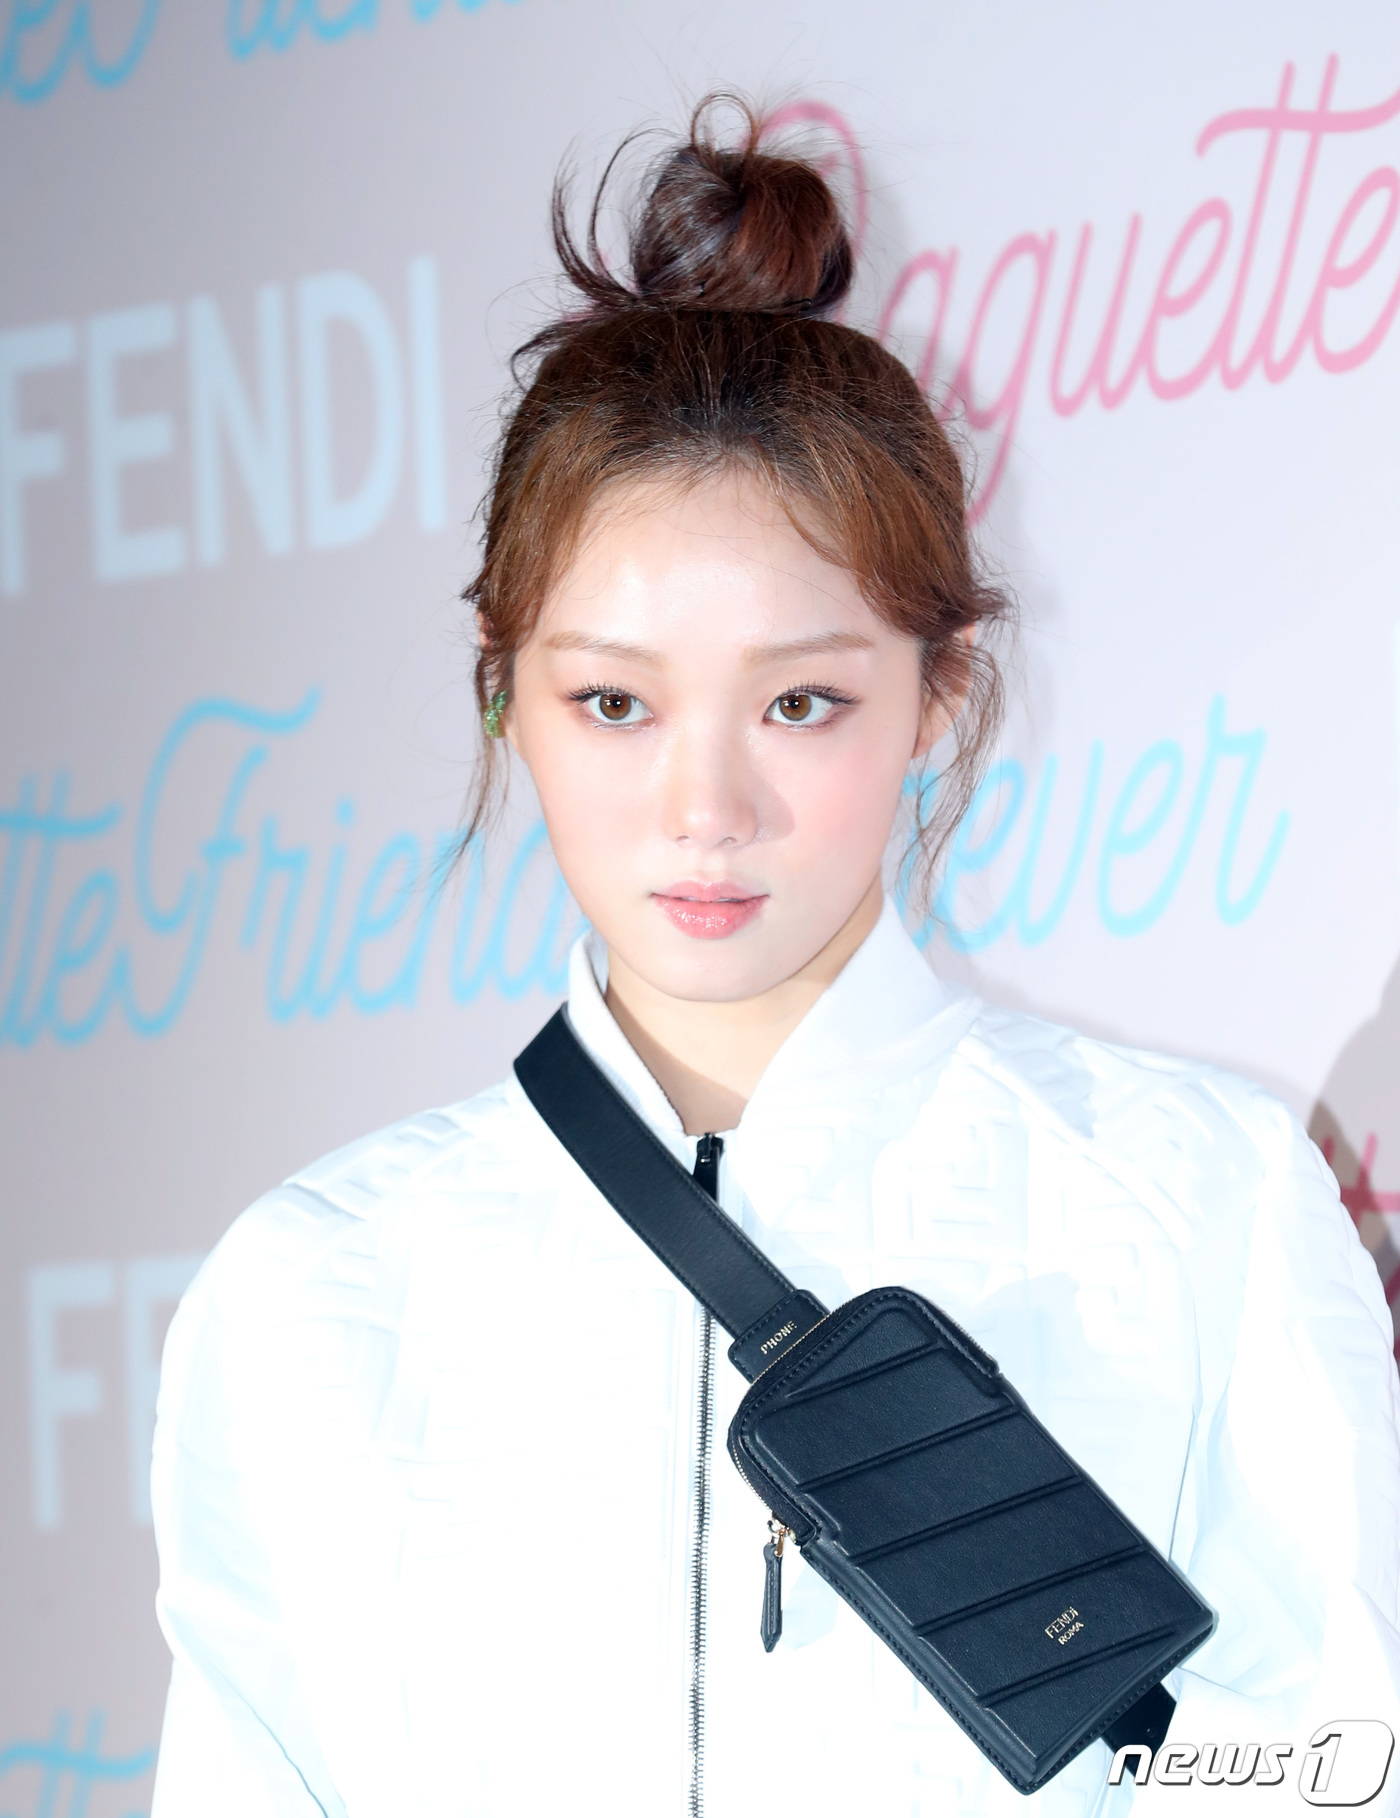 Seoul=) = Actor Lee Sung-kyung poses at a photocall commemorating the launch of the 2019 S/S collection by Fendi, an Italian fashion brand, at EAST Square in Gallerias luxury goods store in Apgujeong-ro, Gangnam-gu, Seoul on Wednesday.February 12, 2019